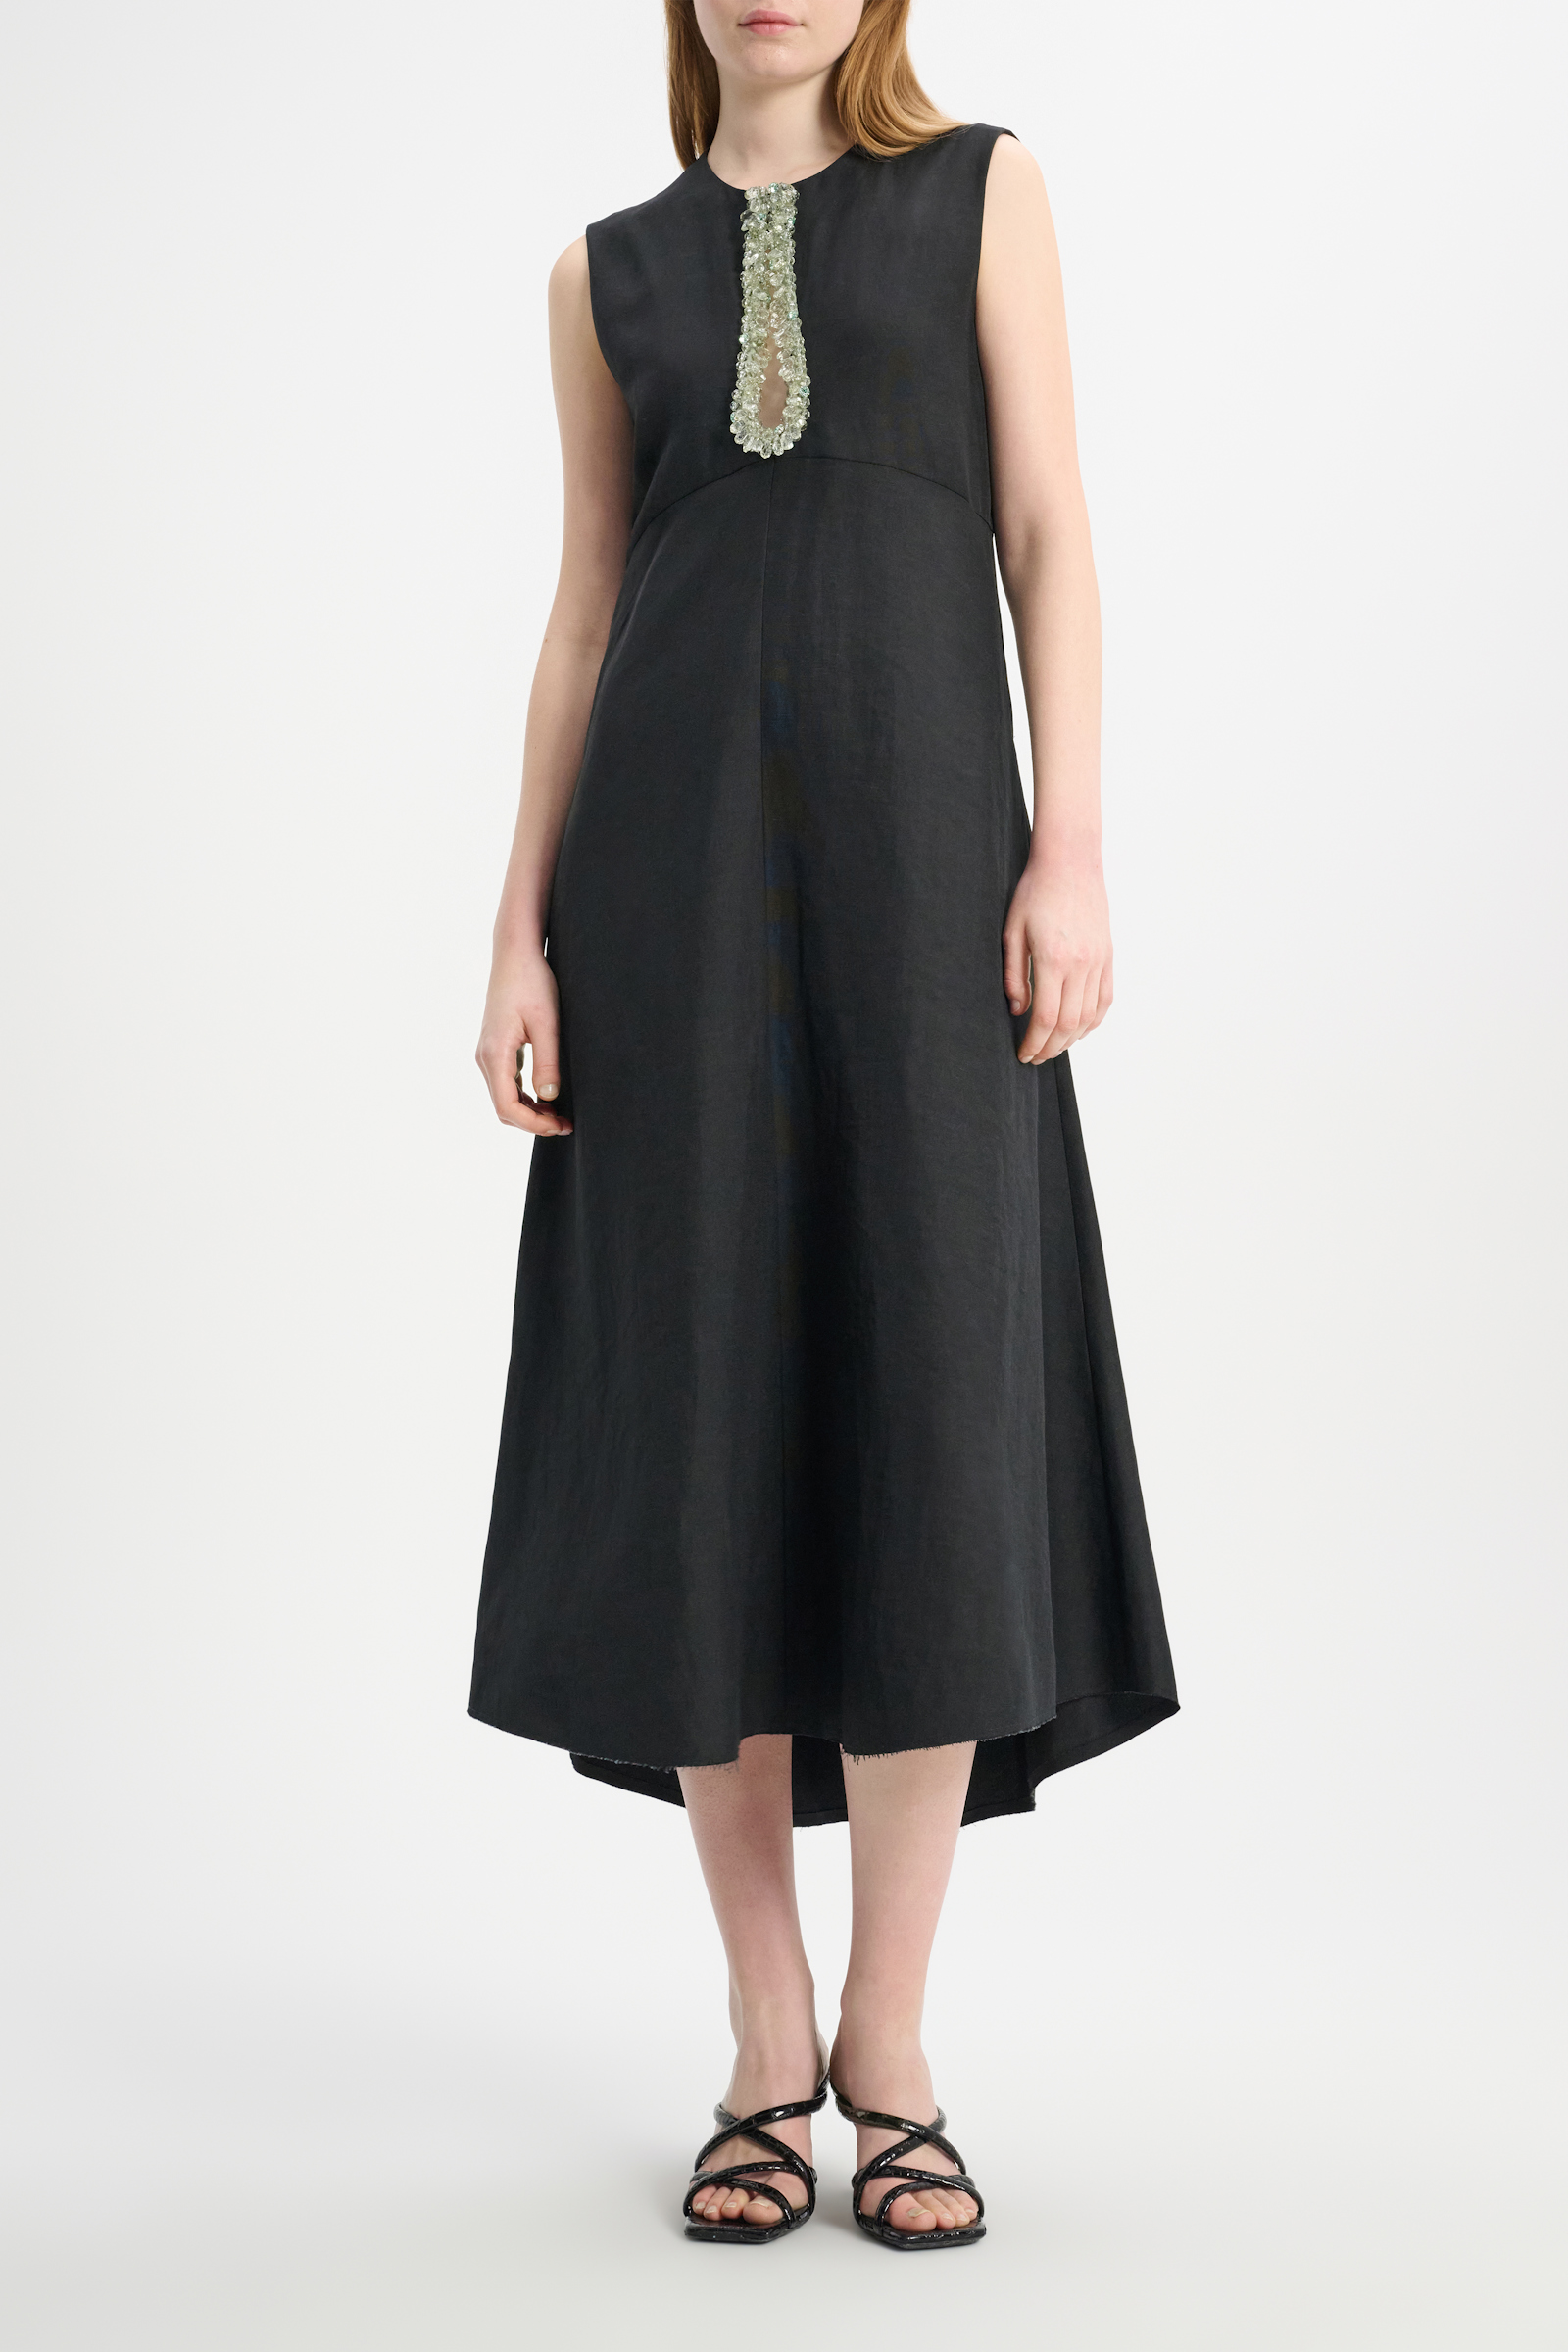 Dorothee Schumacher Linen blend dress with embroidered cutout pure black